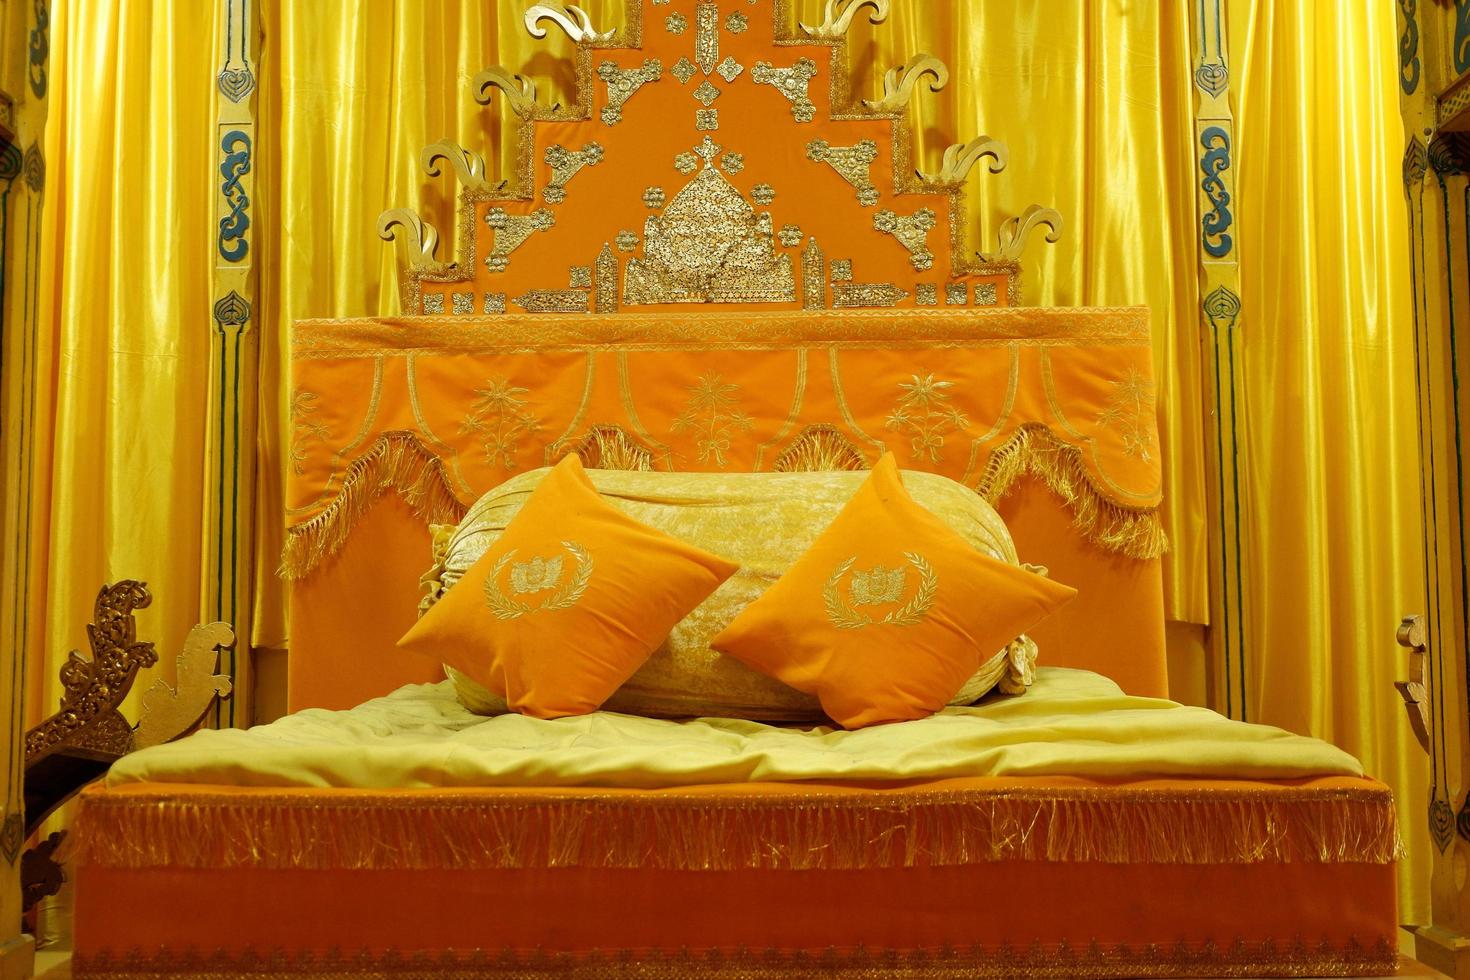 Istana Maimun, Medan North Sumatera, Indonesia - October 23, 2021, Orange bed with pillows and decorated with golden curtains photo